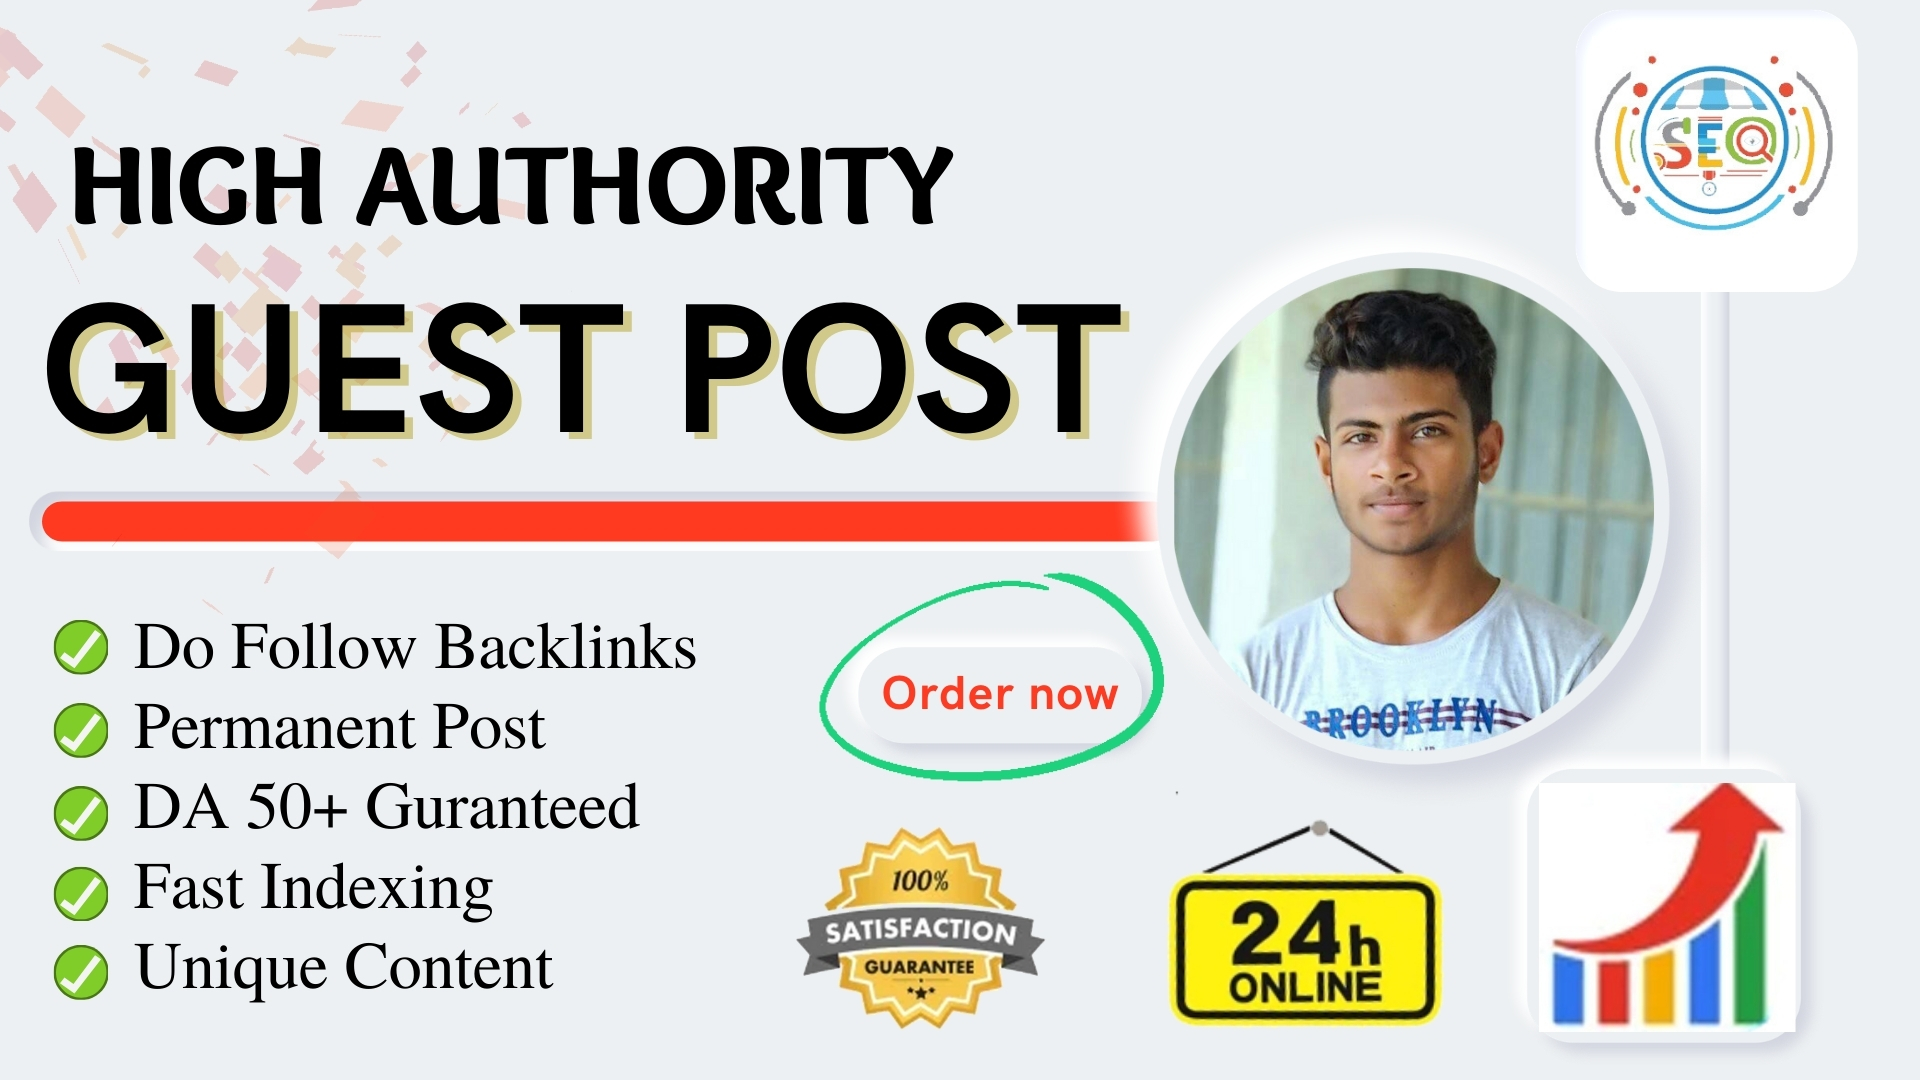 I will create high authority guest post within 24 hours